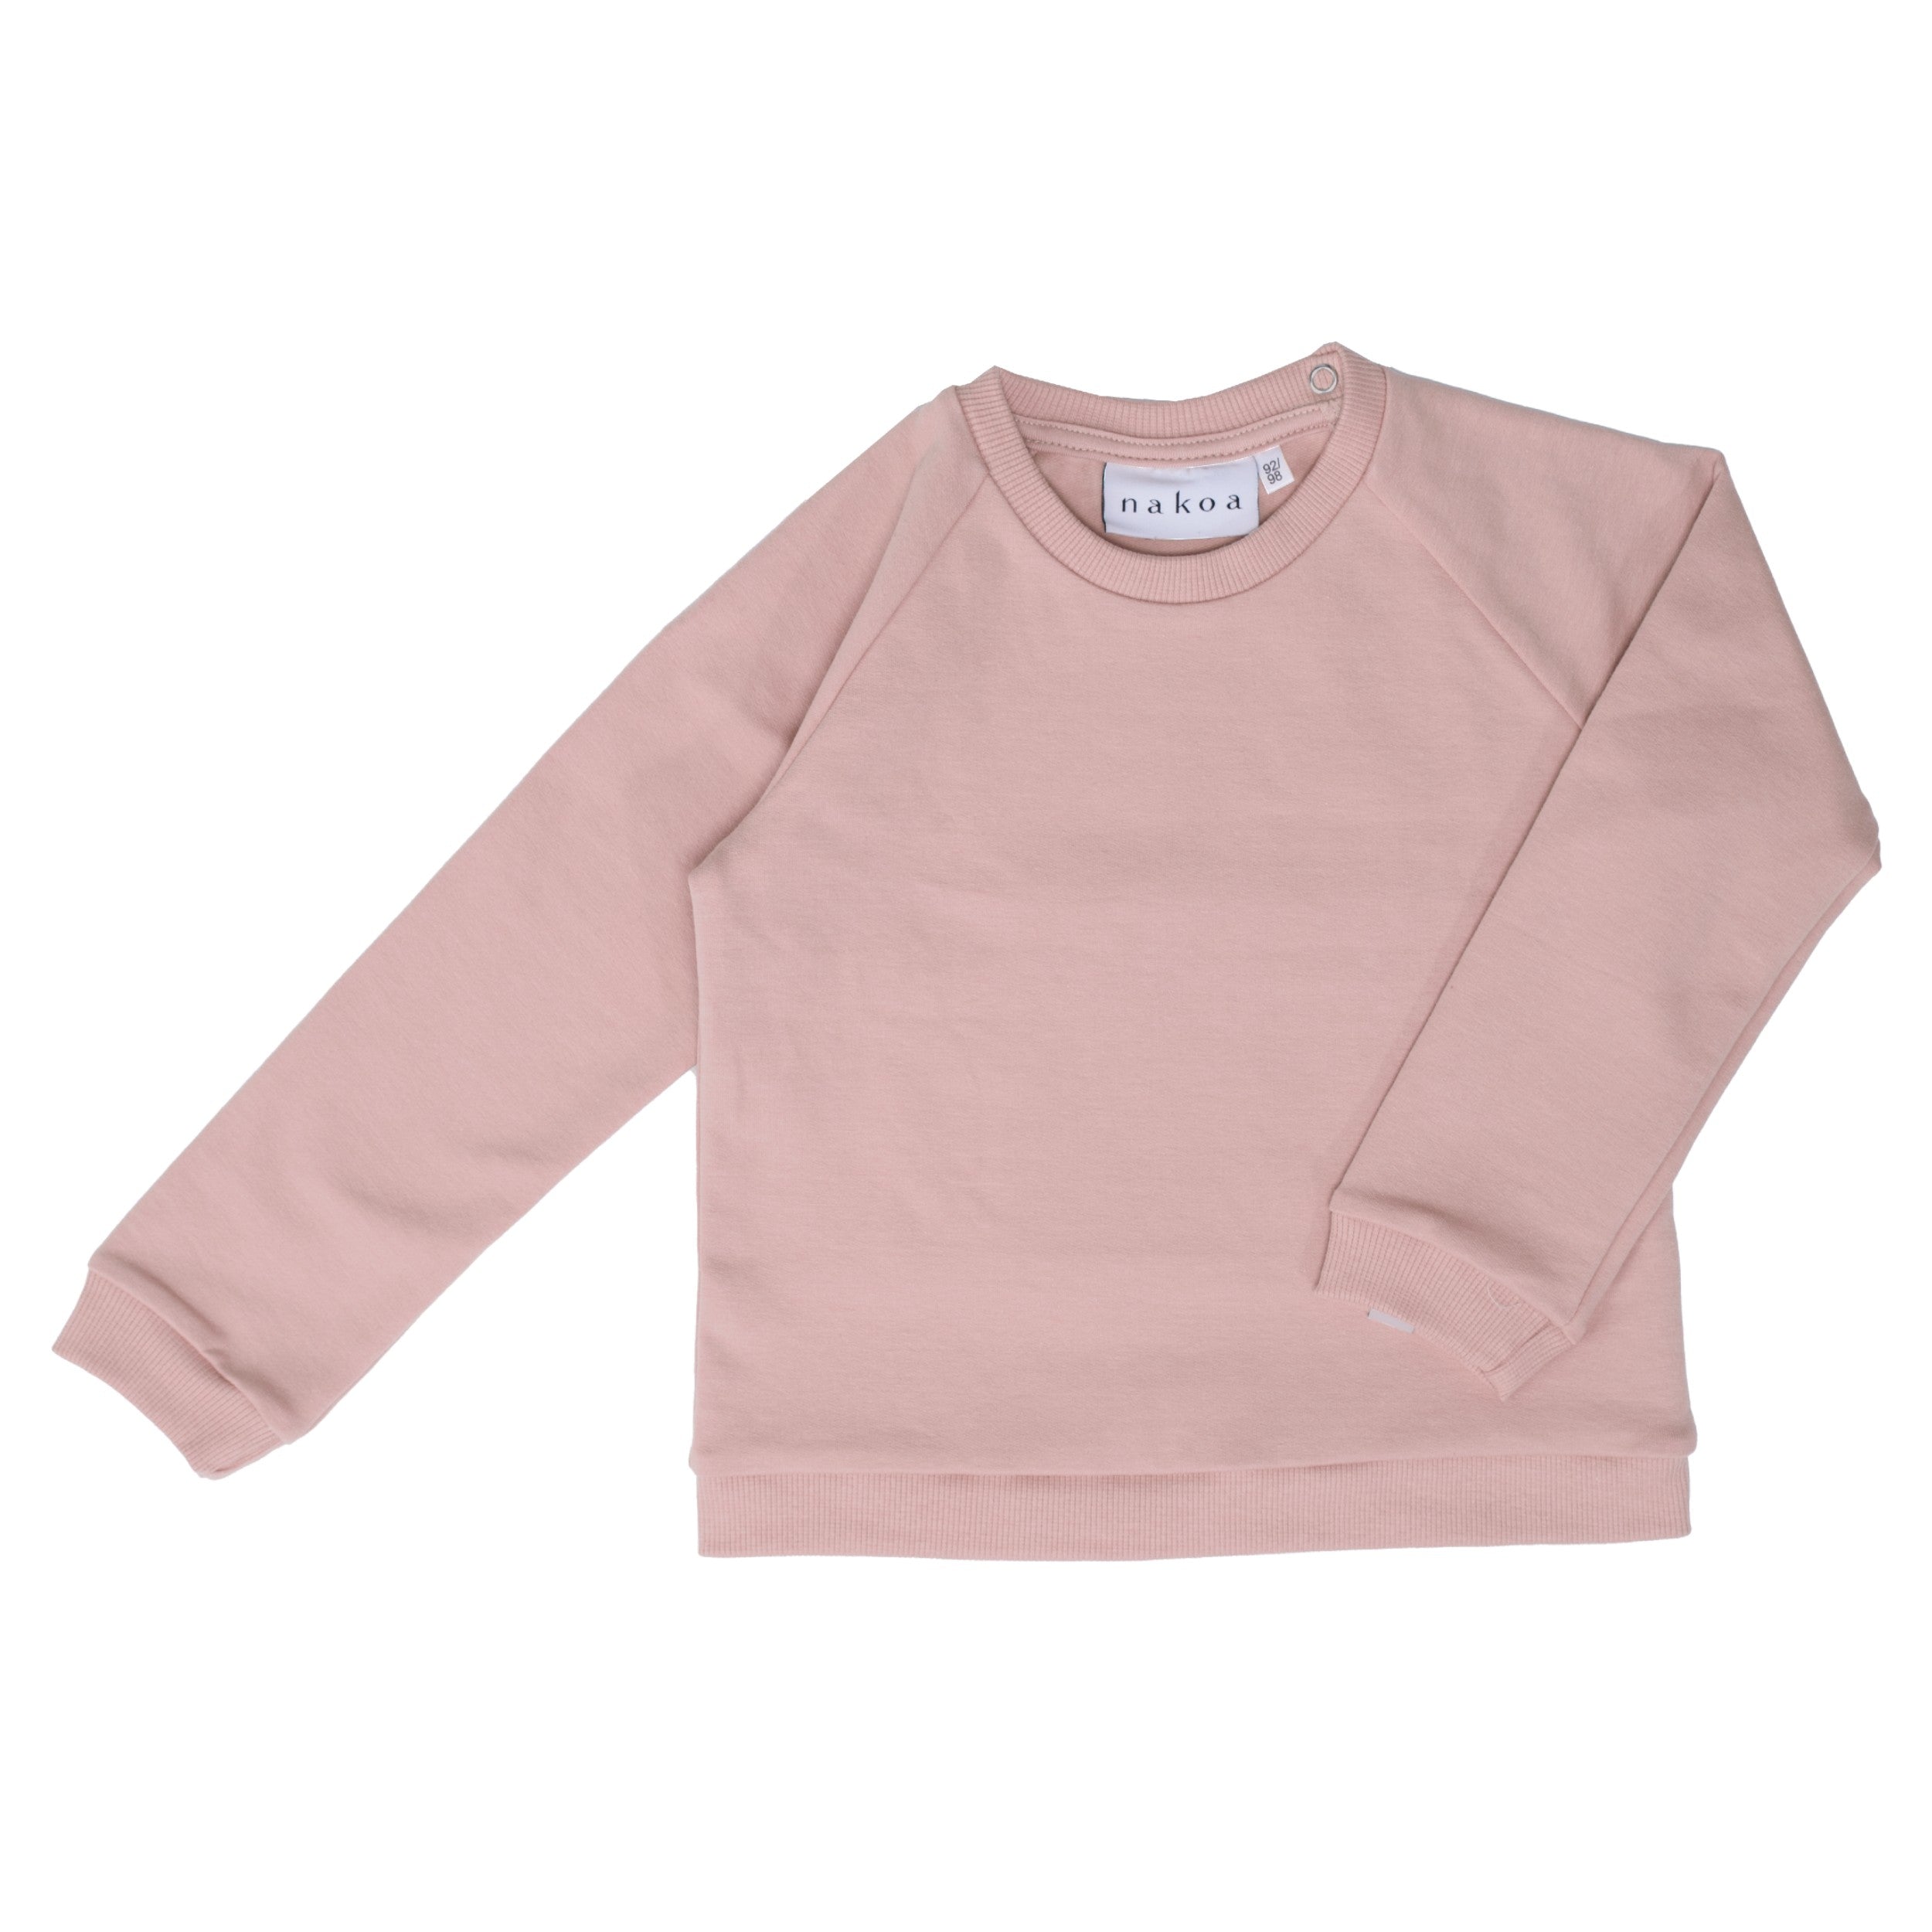 Comfy College Shirt, Dusty Pink